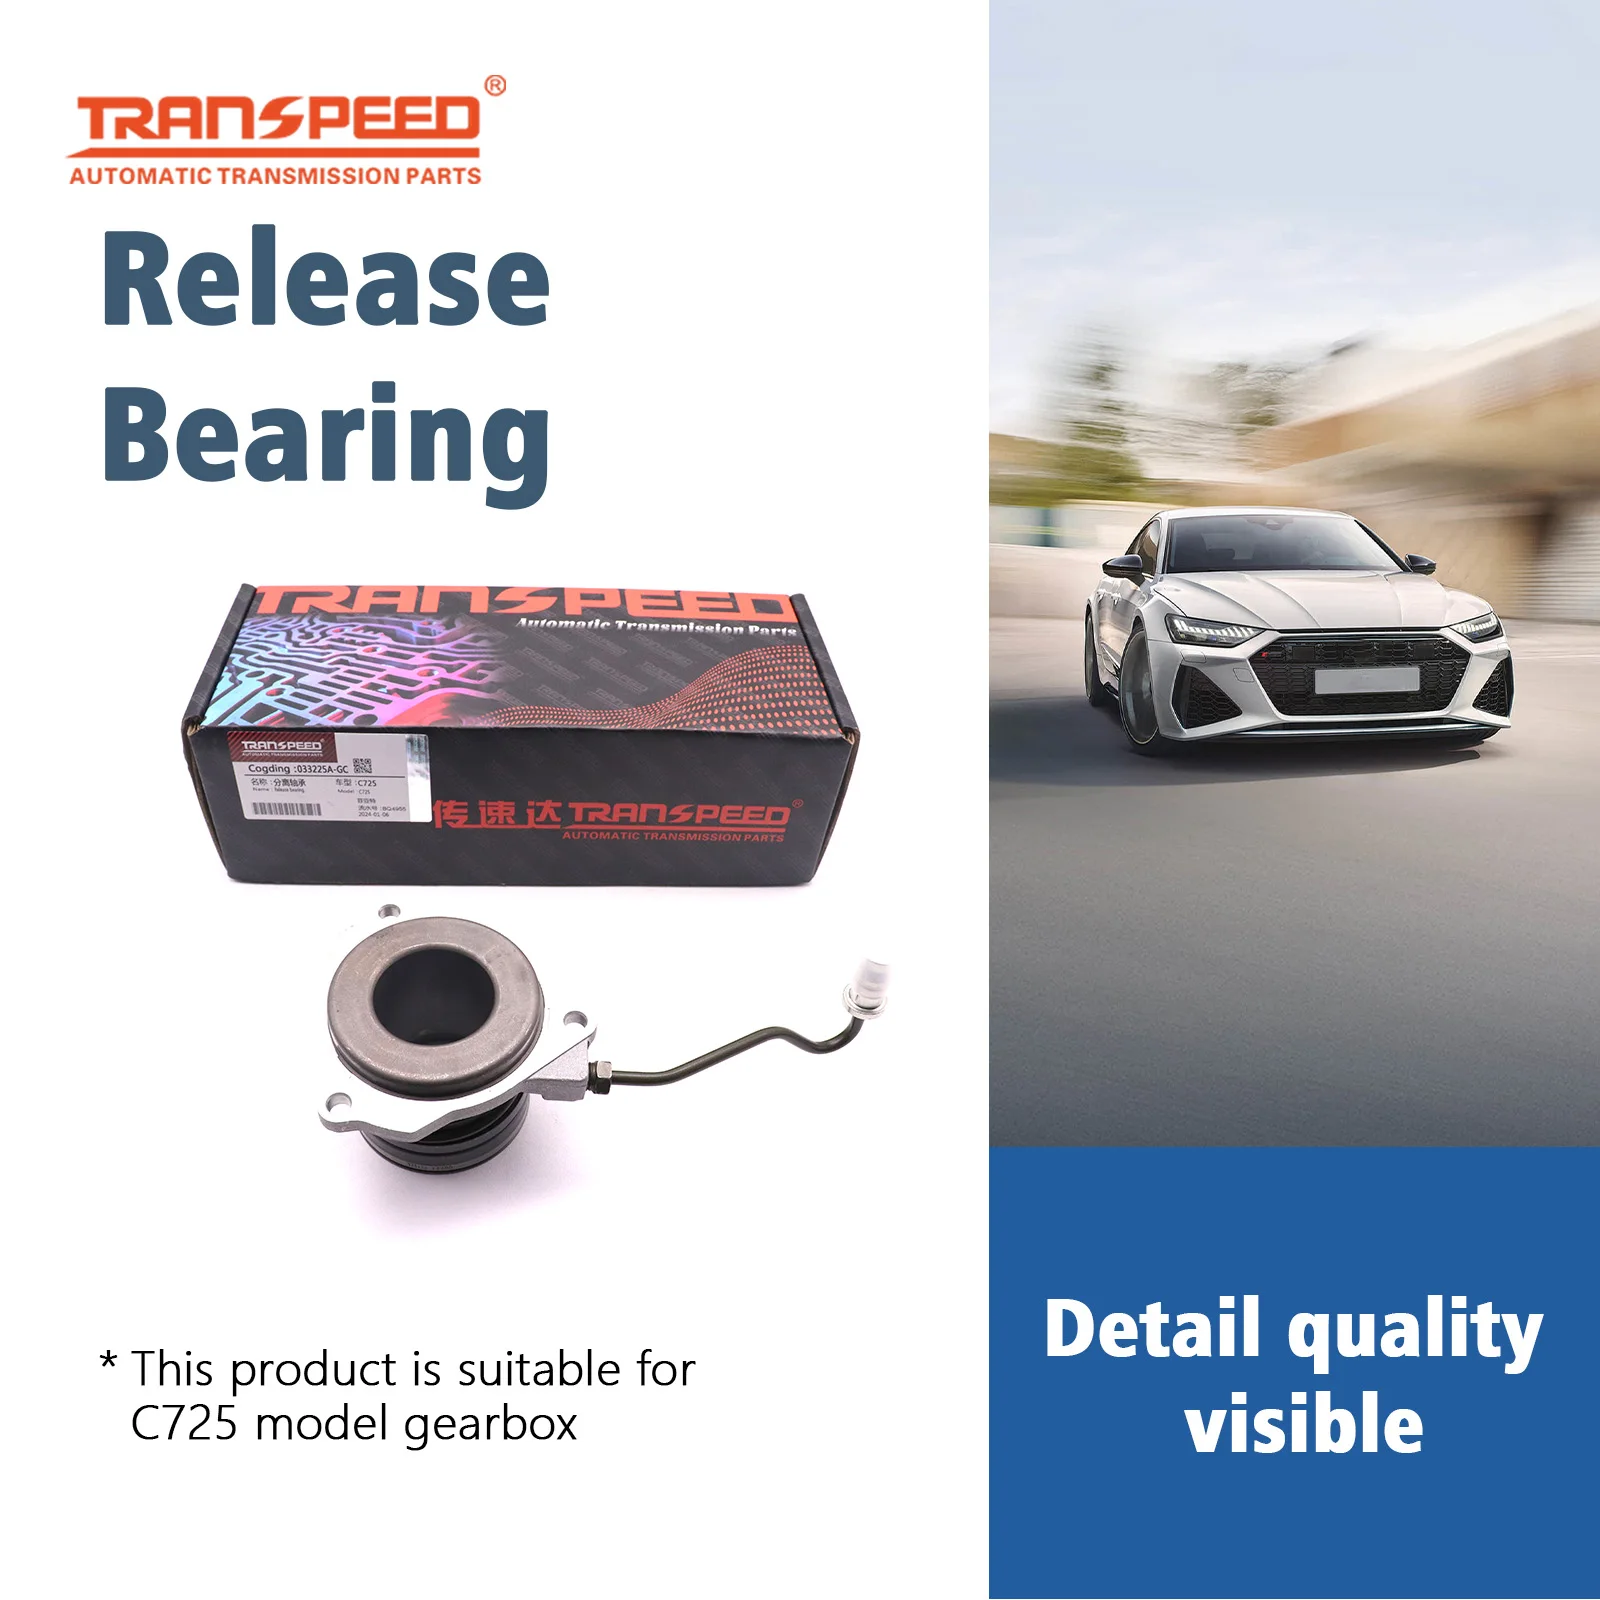 TRANSPEED Auto Transmission Release Bearing